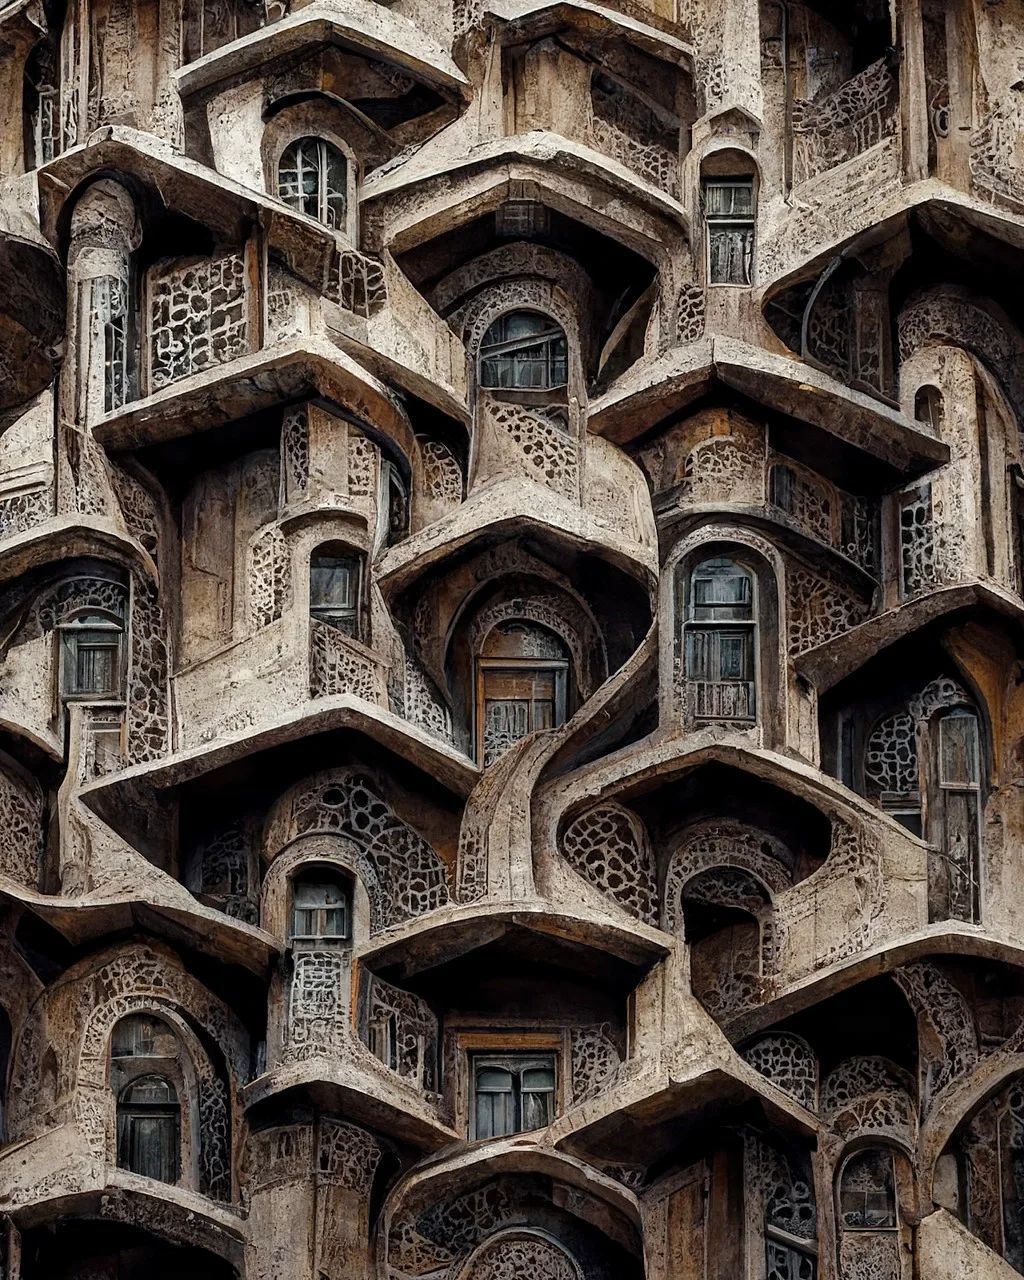 The Cairo Sketches" Ai generated patterns exploring Islamic Cairo architectural Facades" by Hassan Ragab